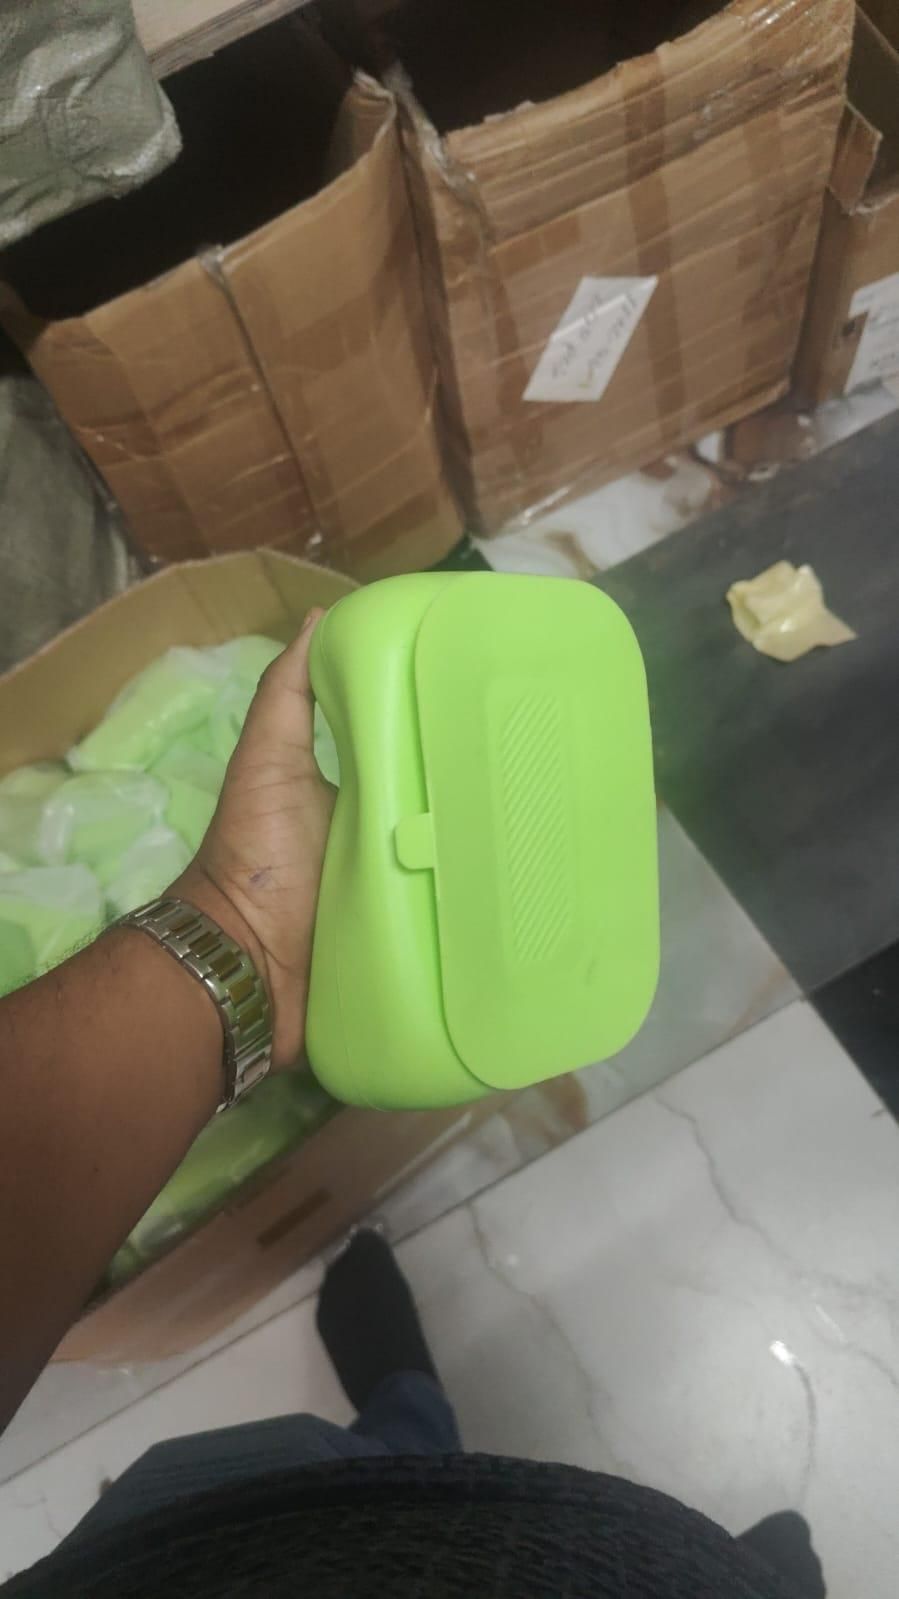 Suction Cup Tissue Box